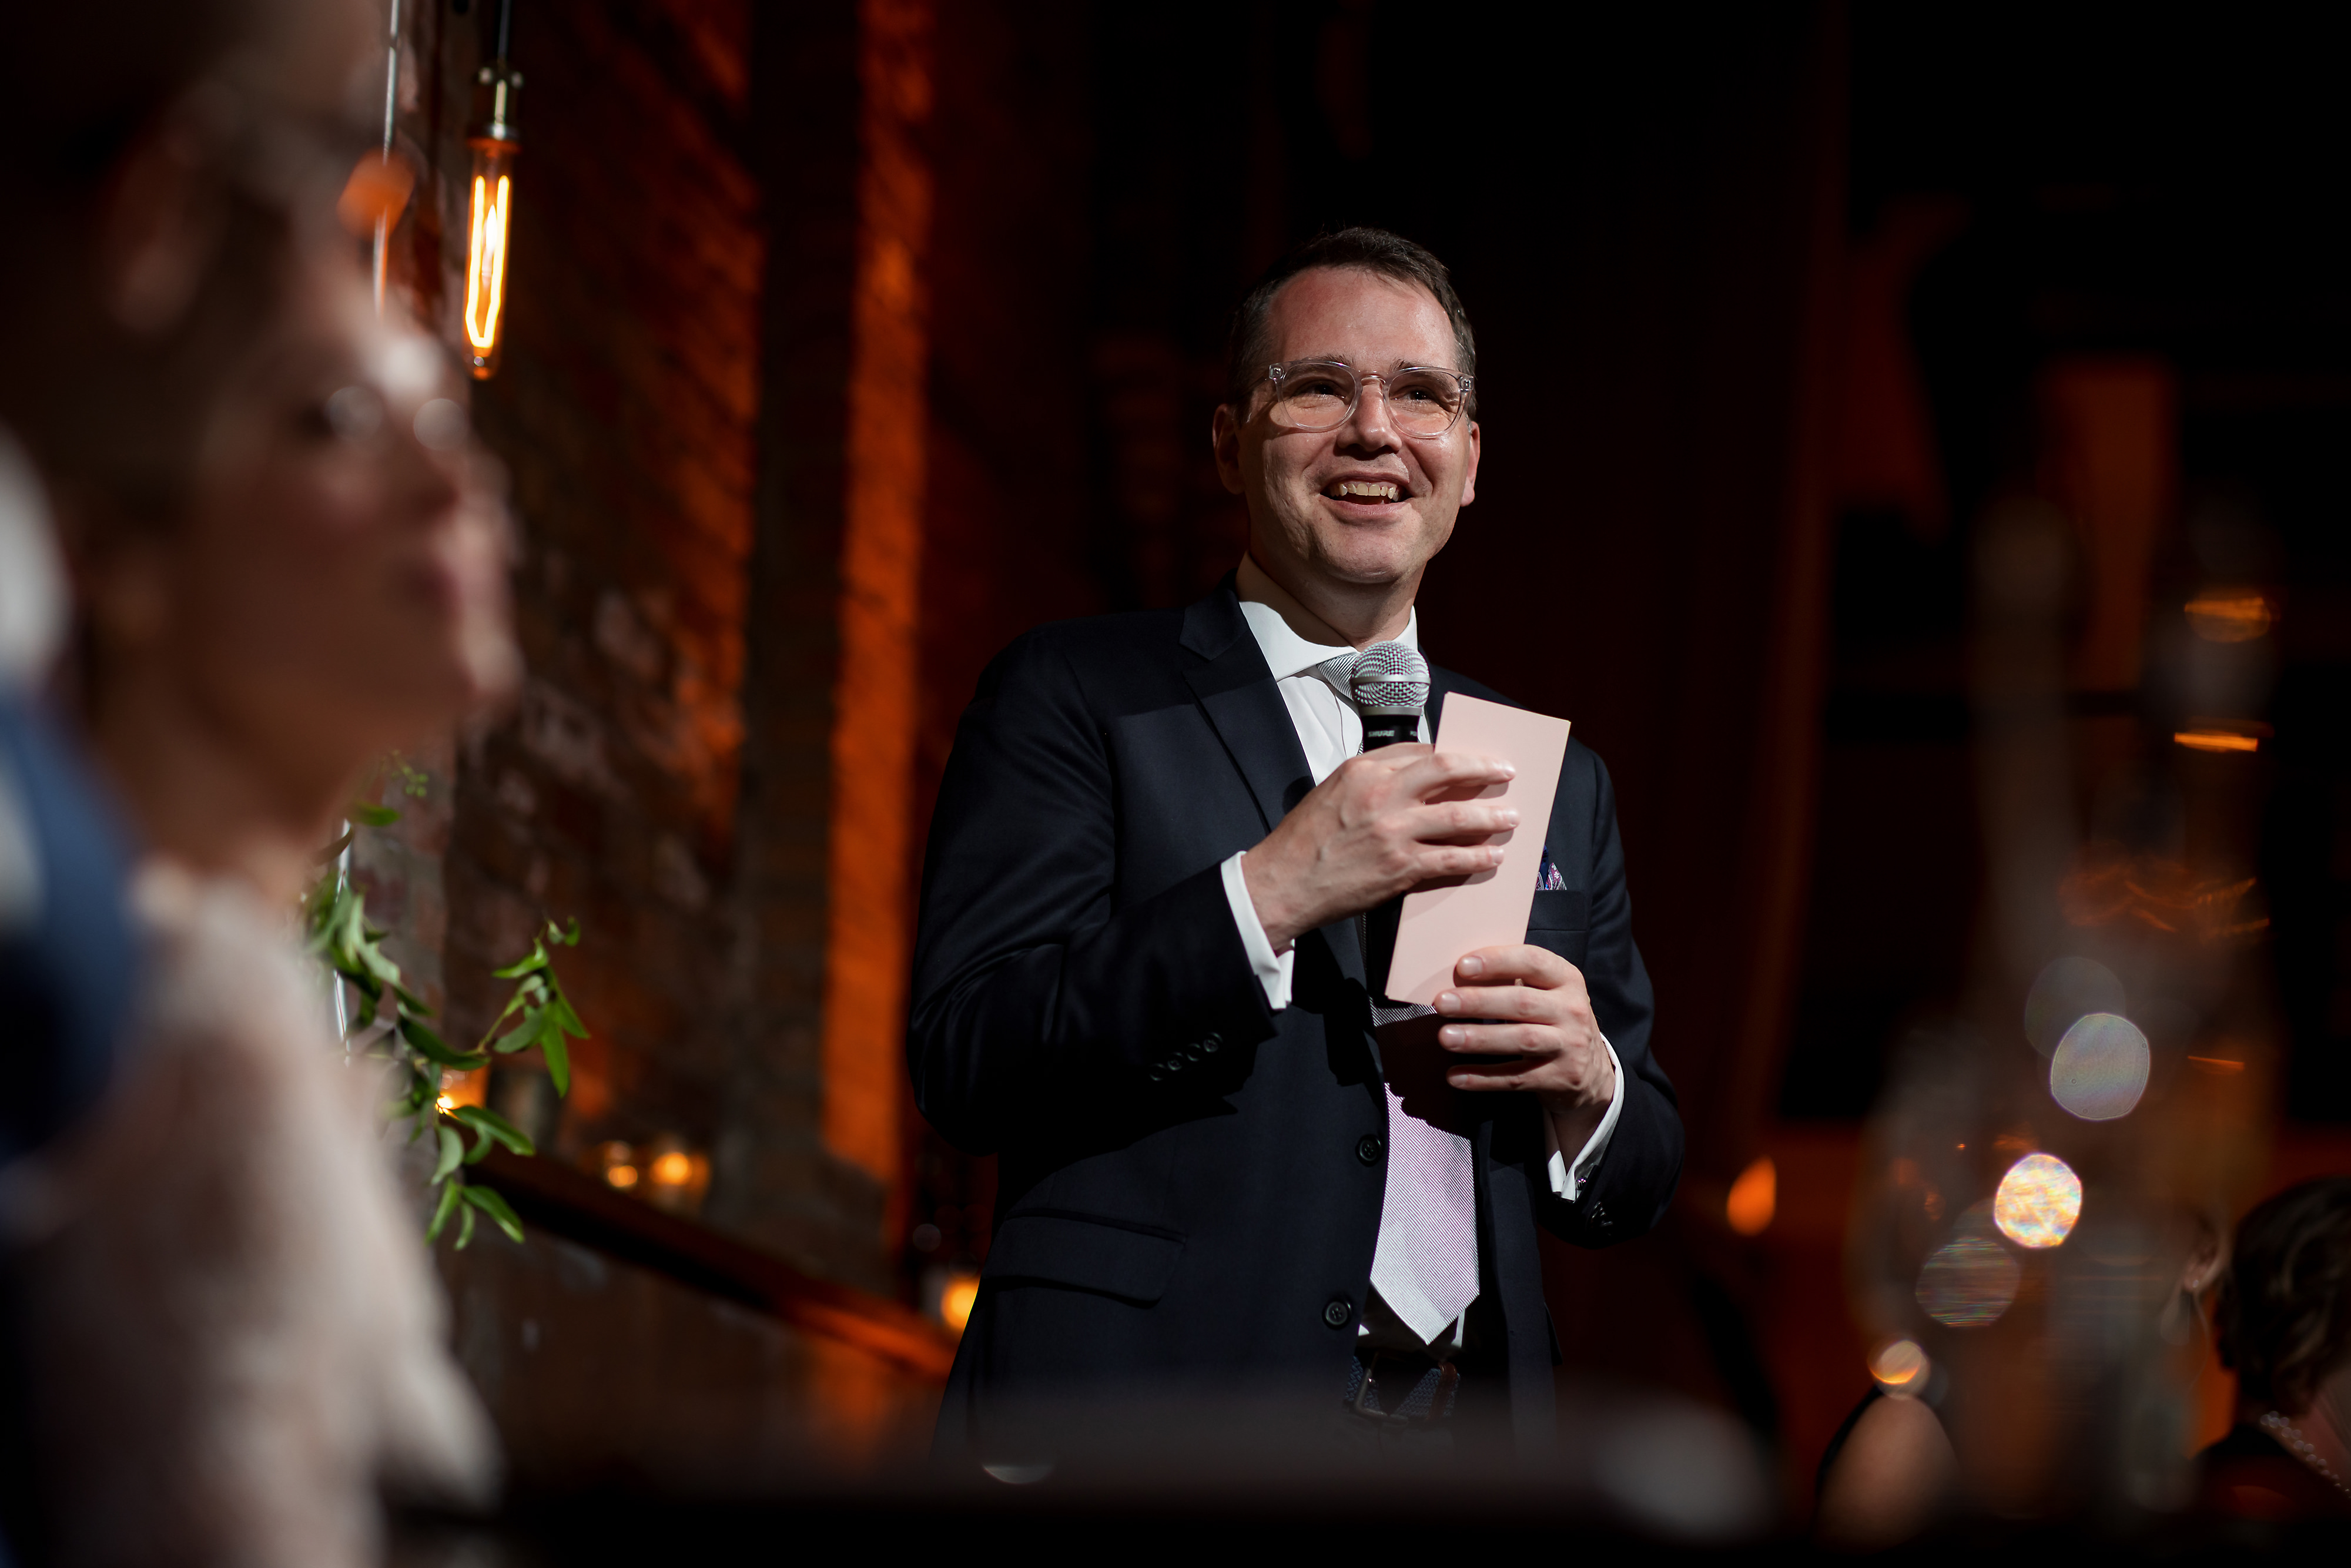 Groomsman gives toast during wedding reception at The Fairlie